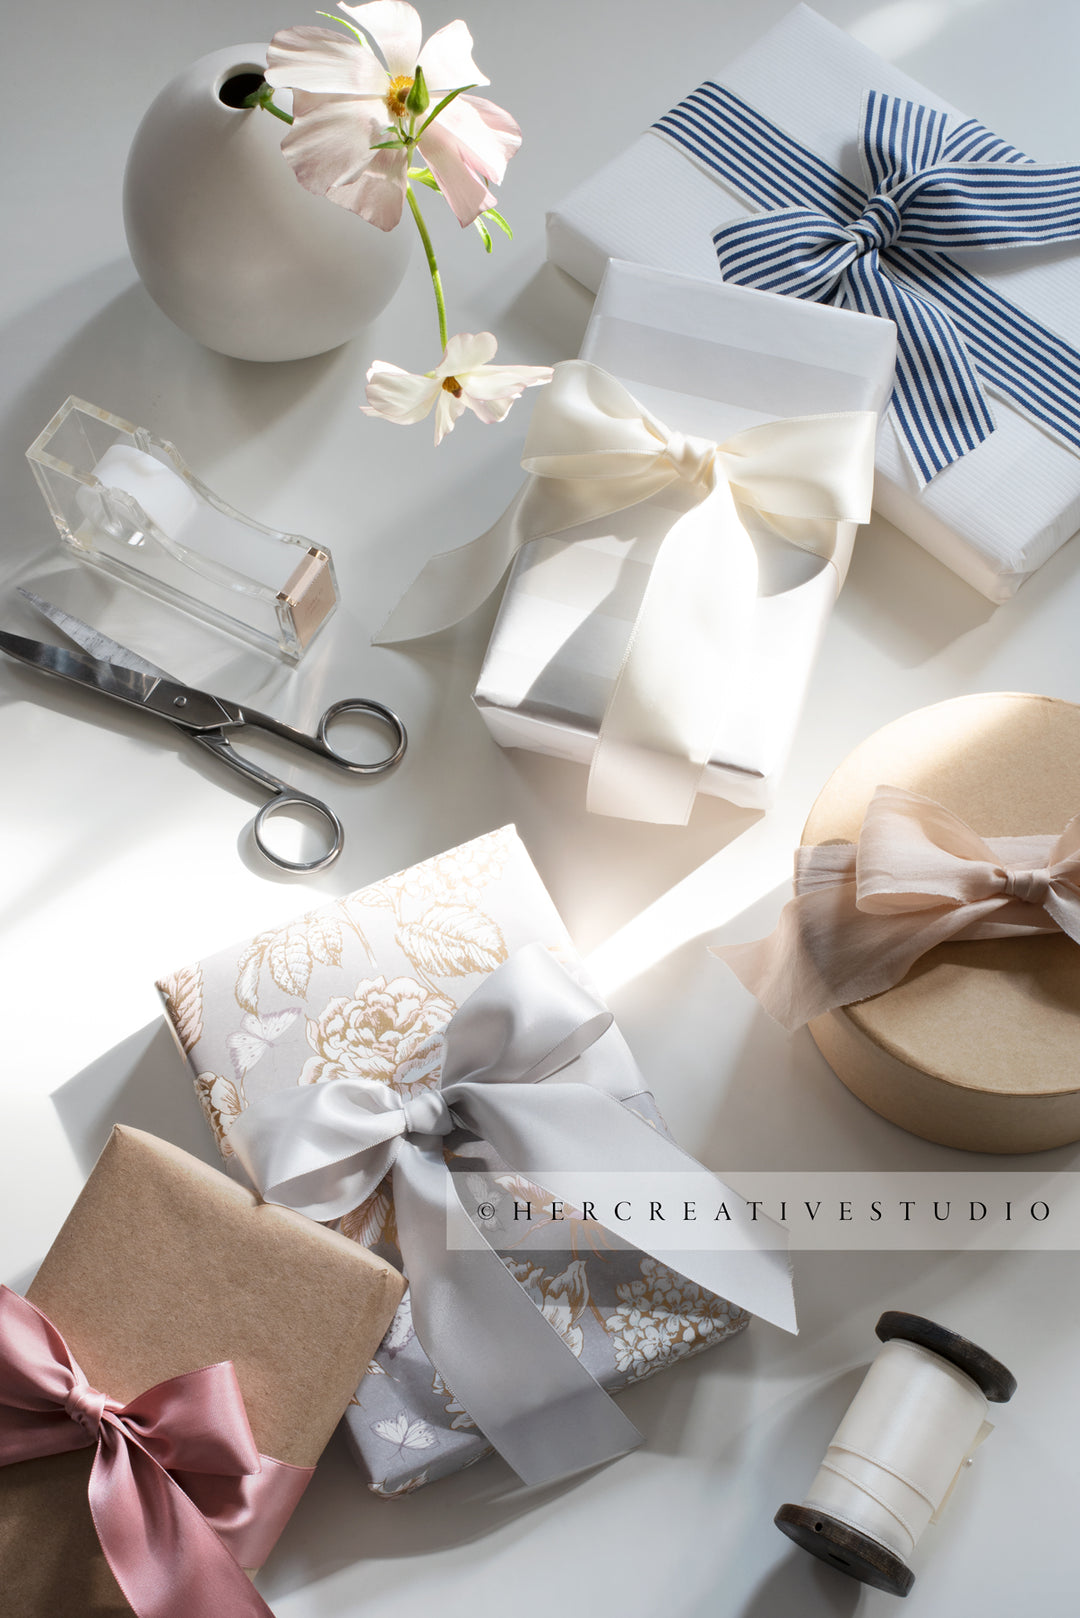 Gifts with Ribbon in Sunlight. Stock Image